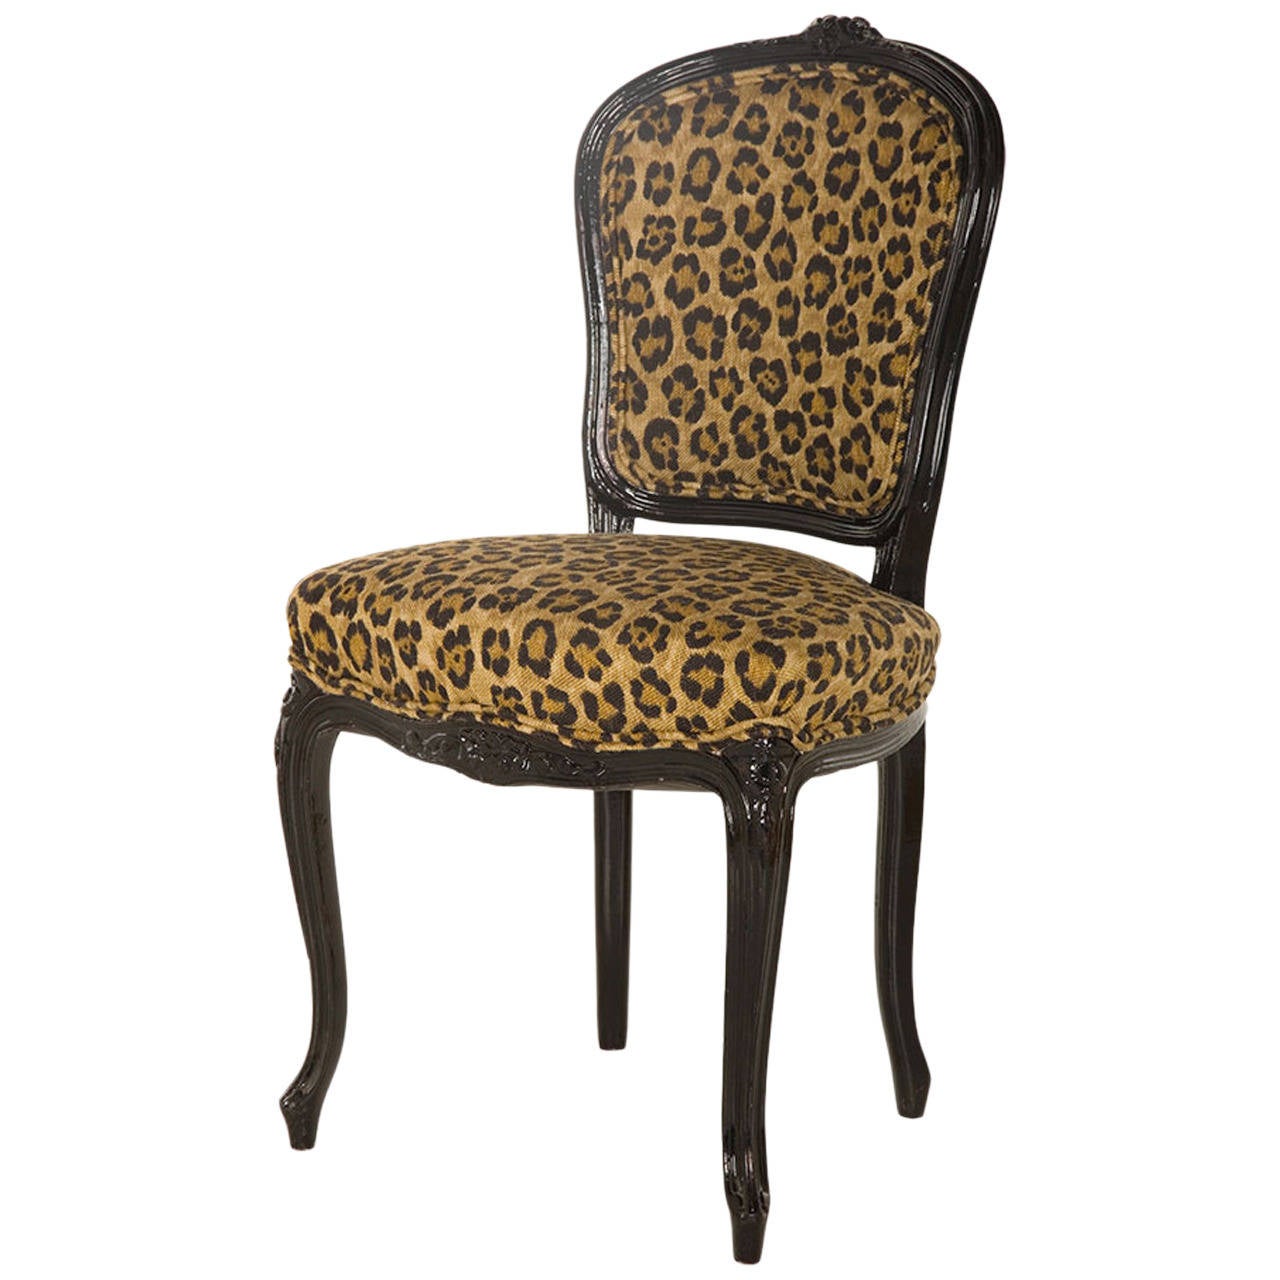 Vintage Leopard Print Cafe Chair At 1stdibs Vintage Cafe Chairs